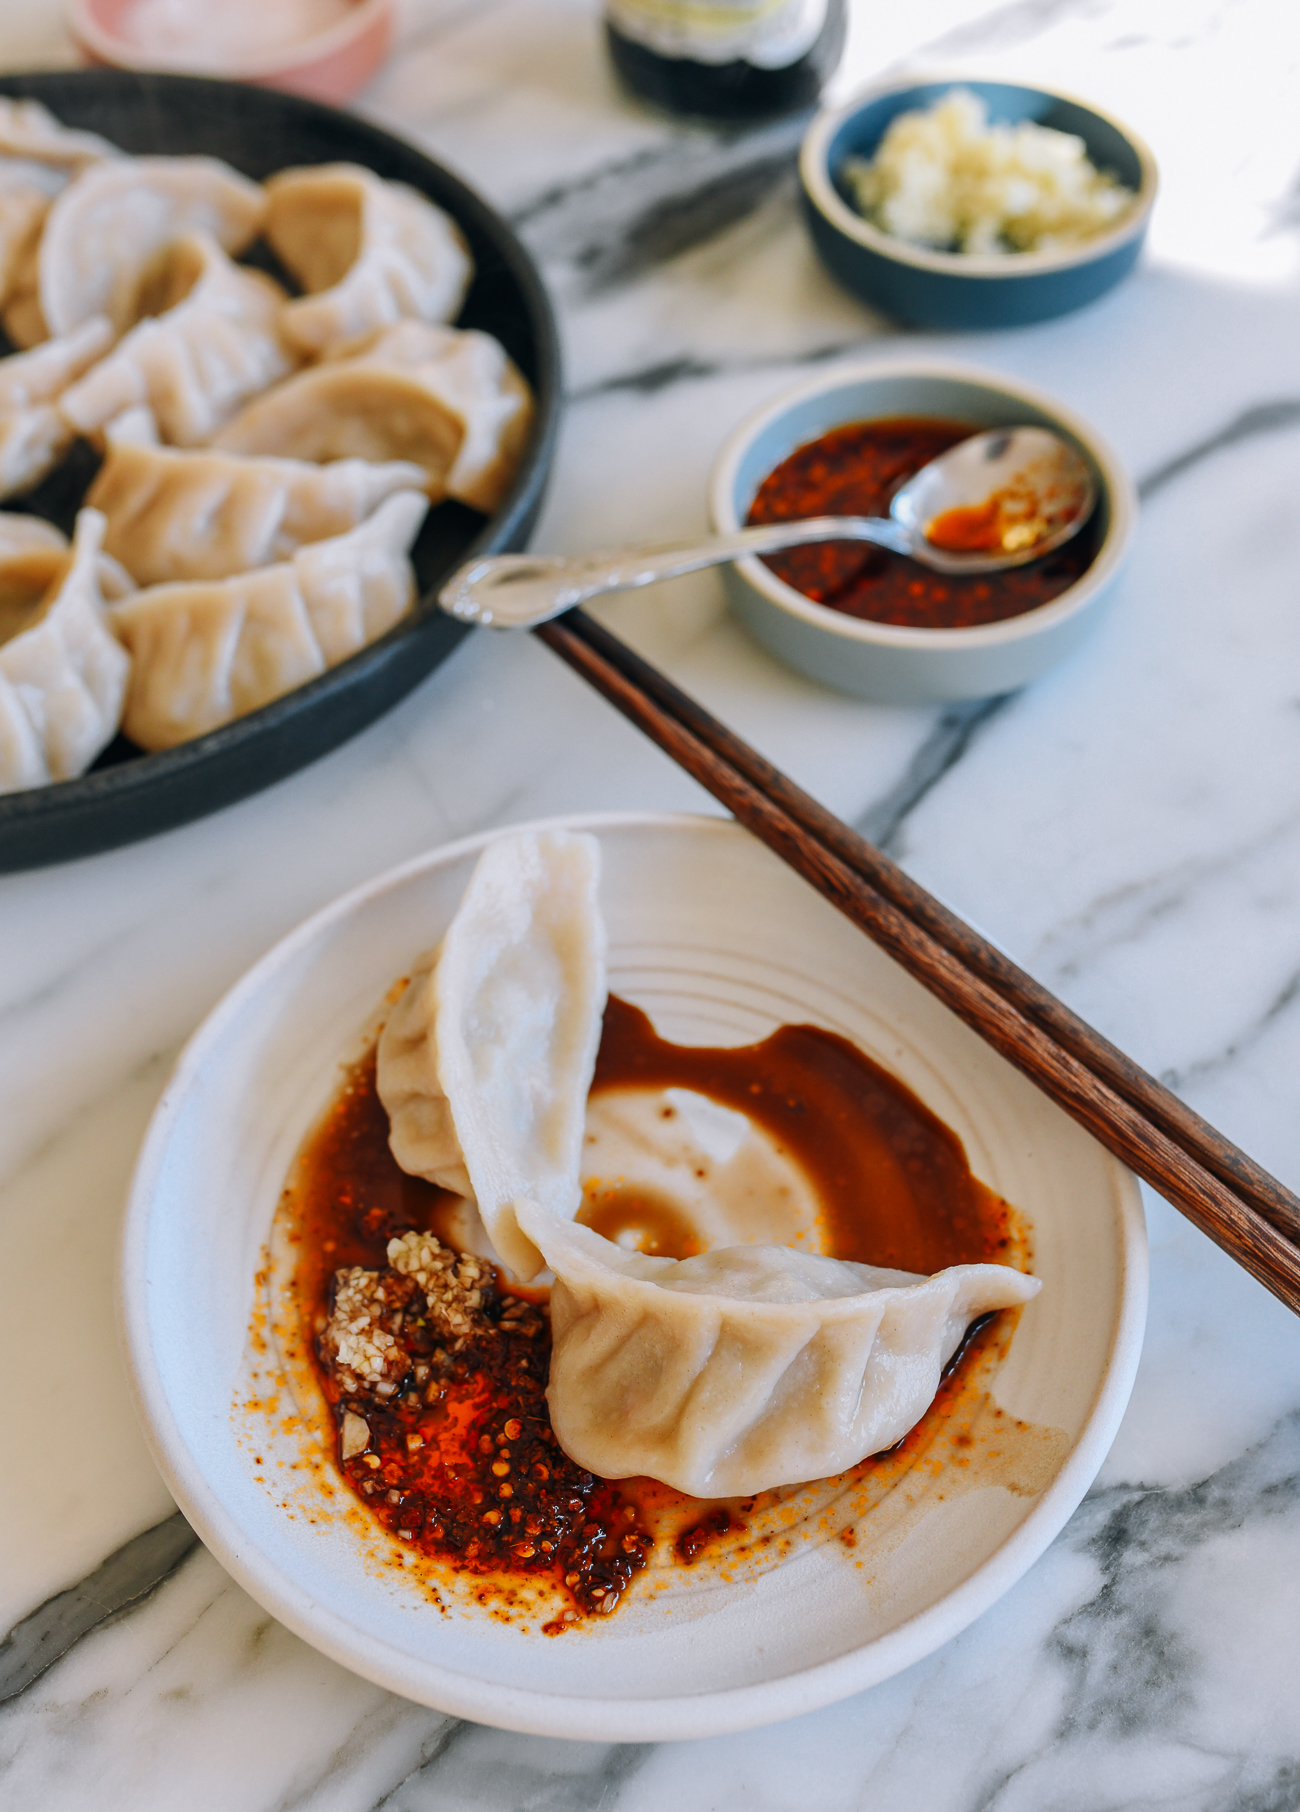 Pork and Celery Dumplings on plate with chili oil, garlic, and vinegar